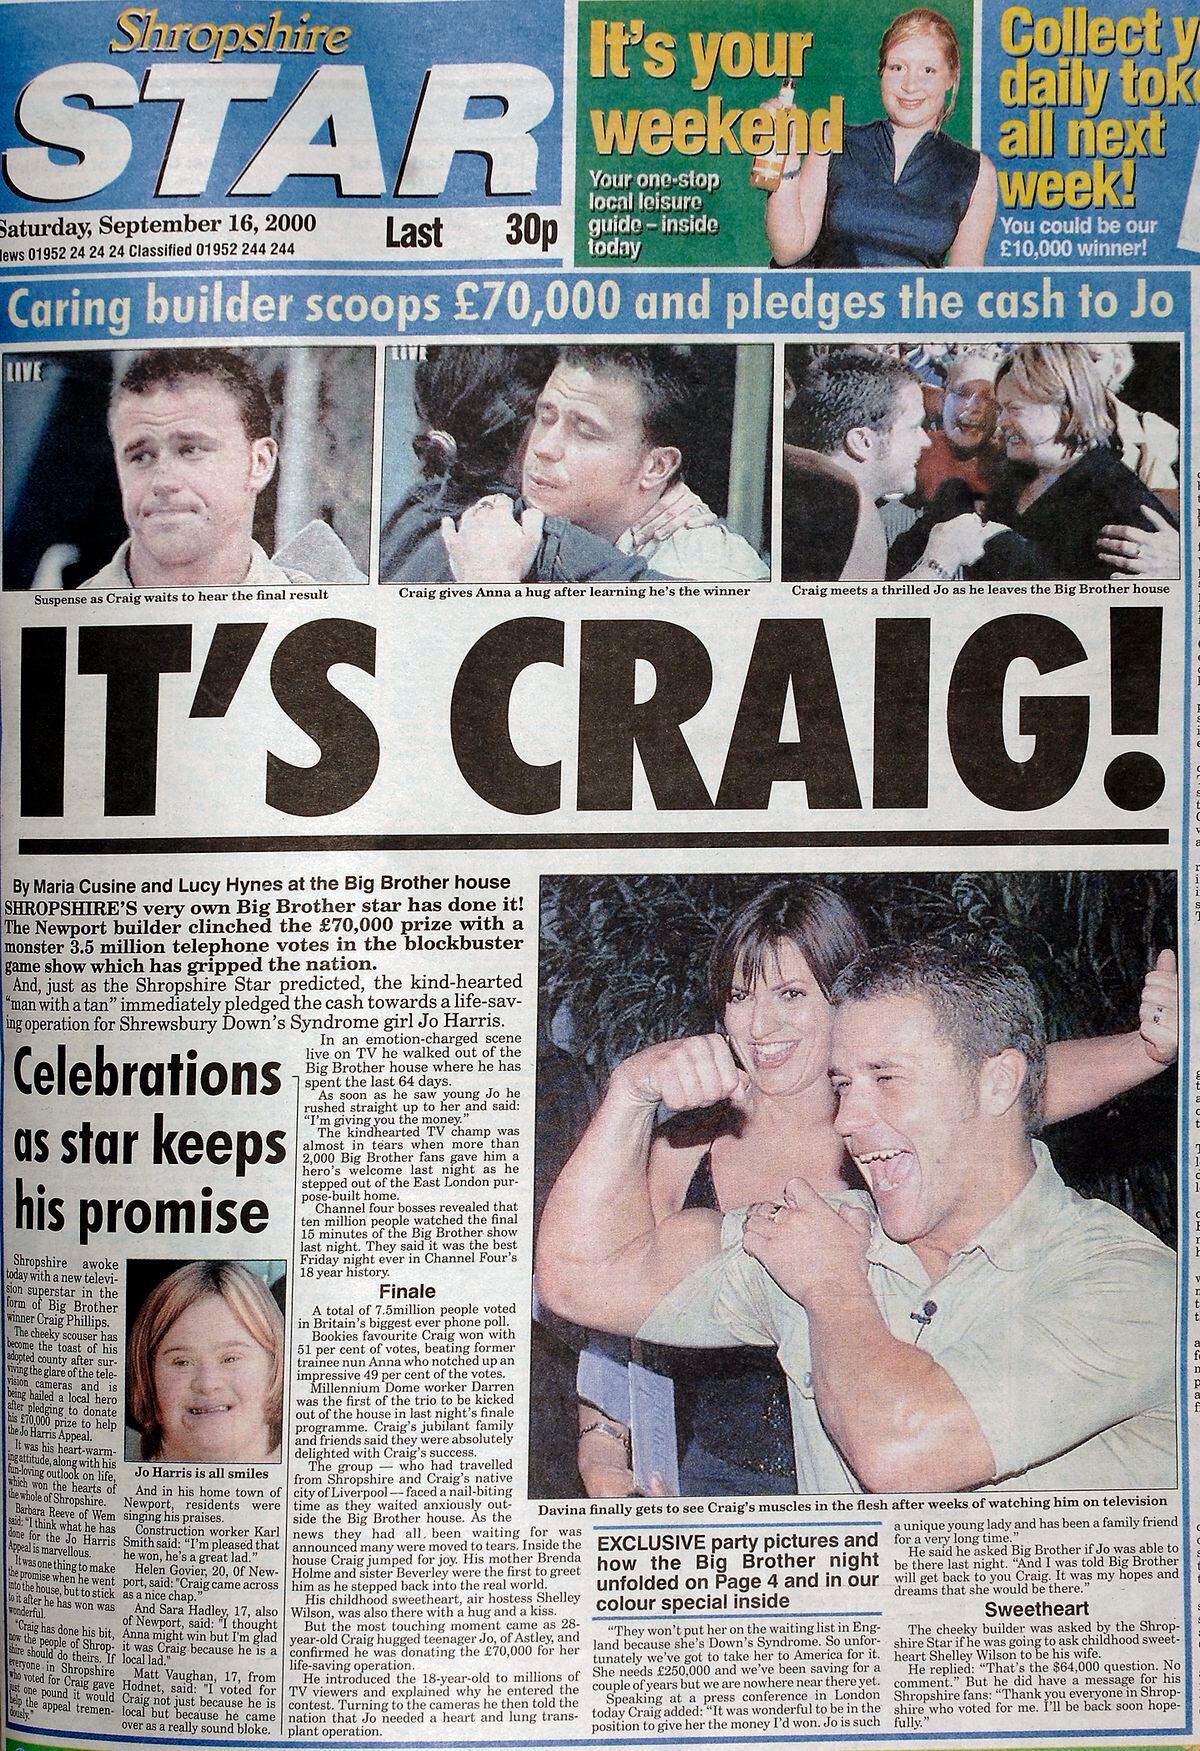 How the Star reported Craig's Big Brother win in 2000